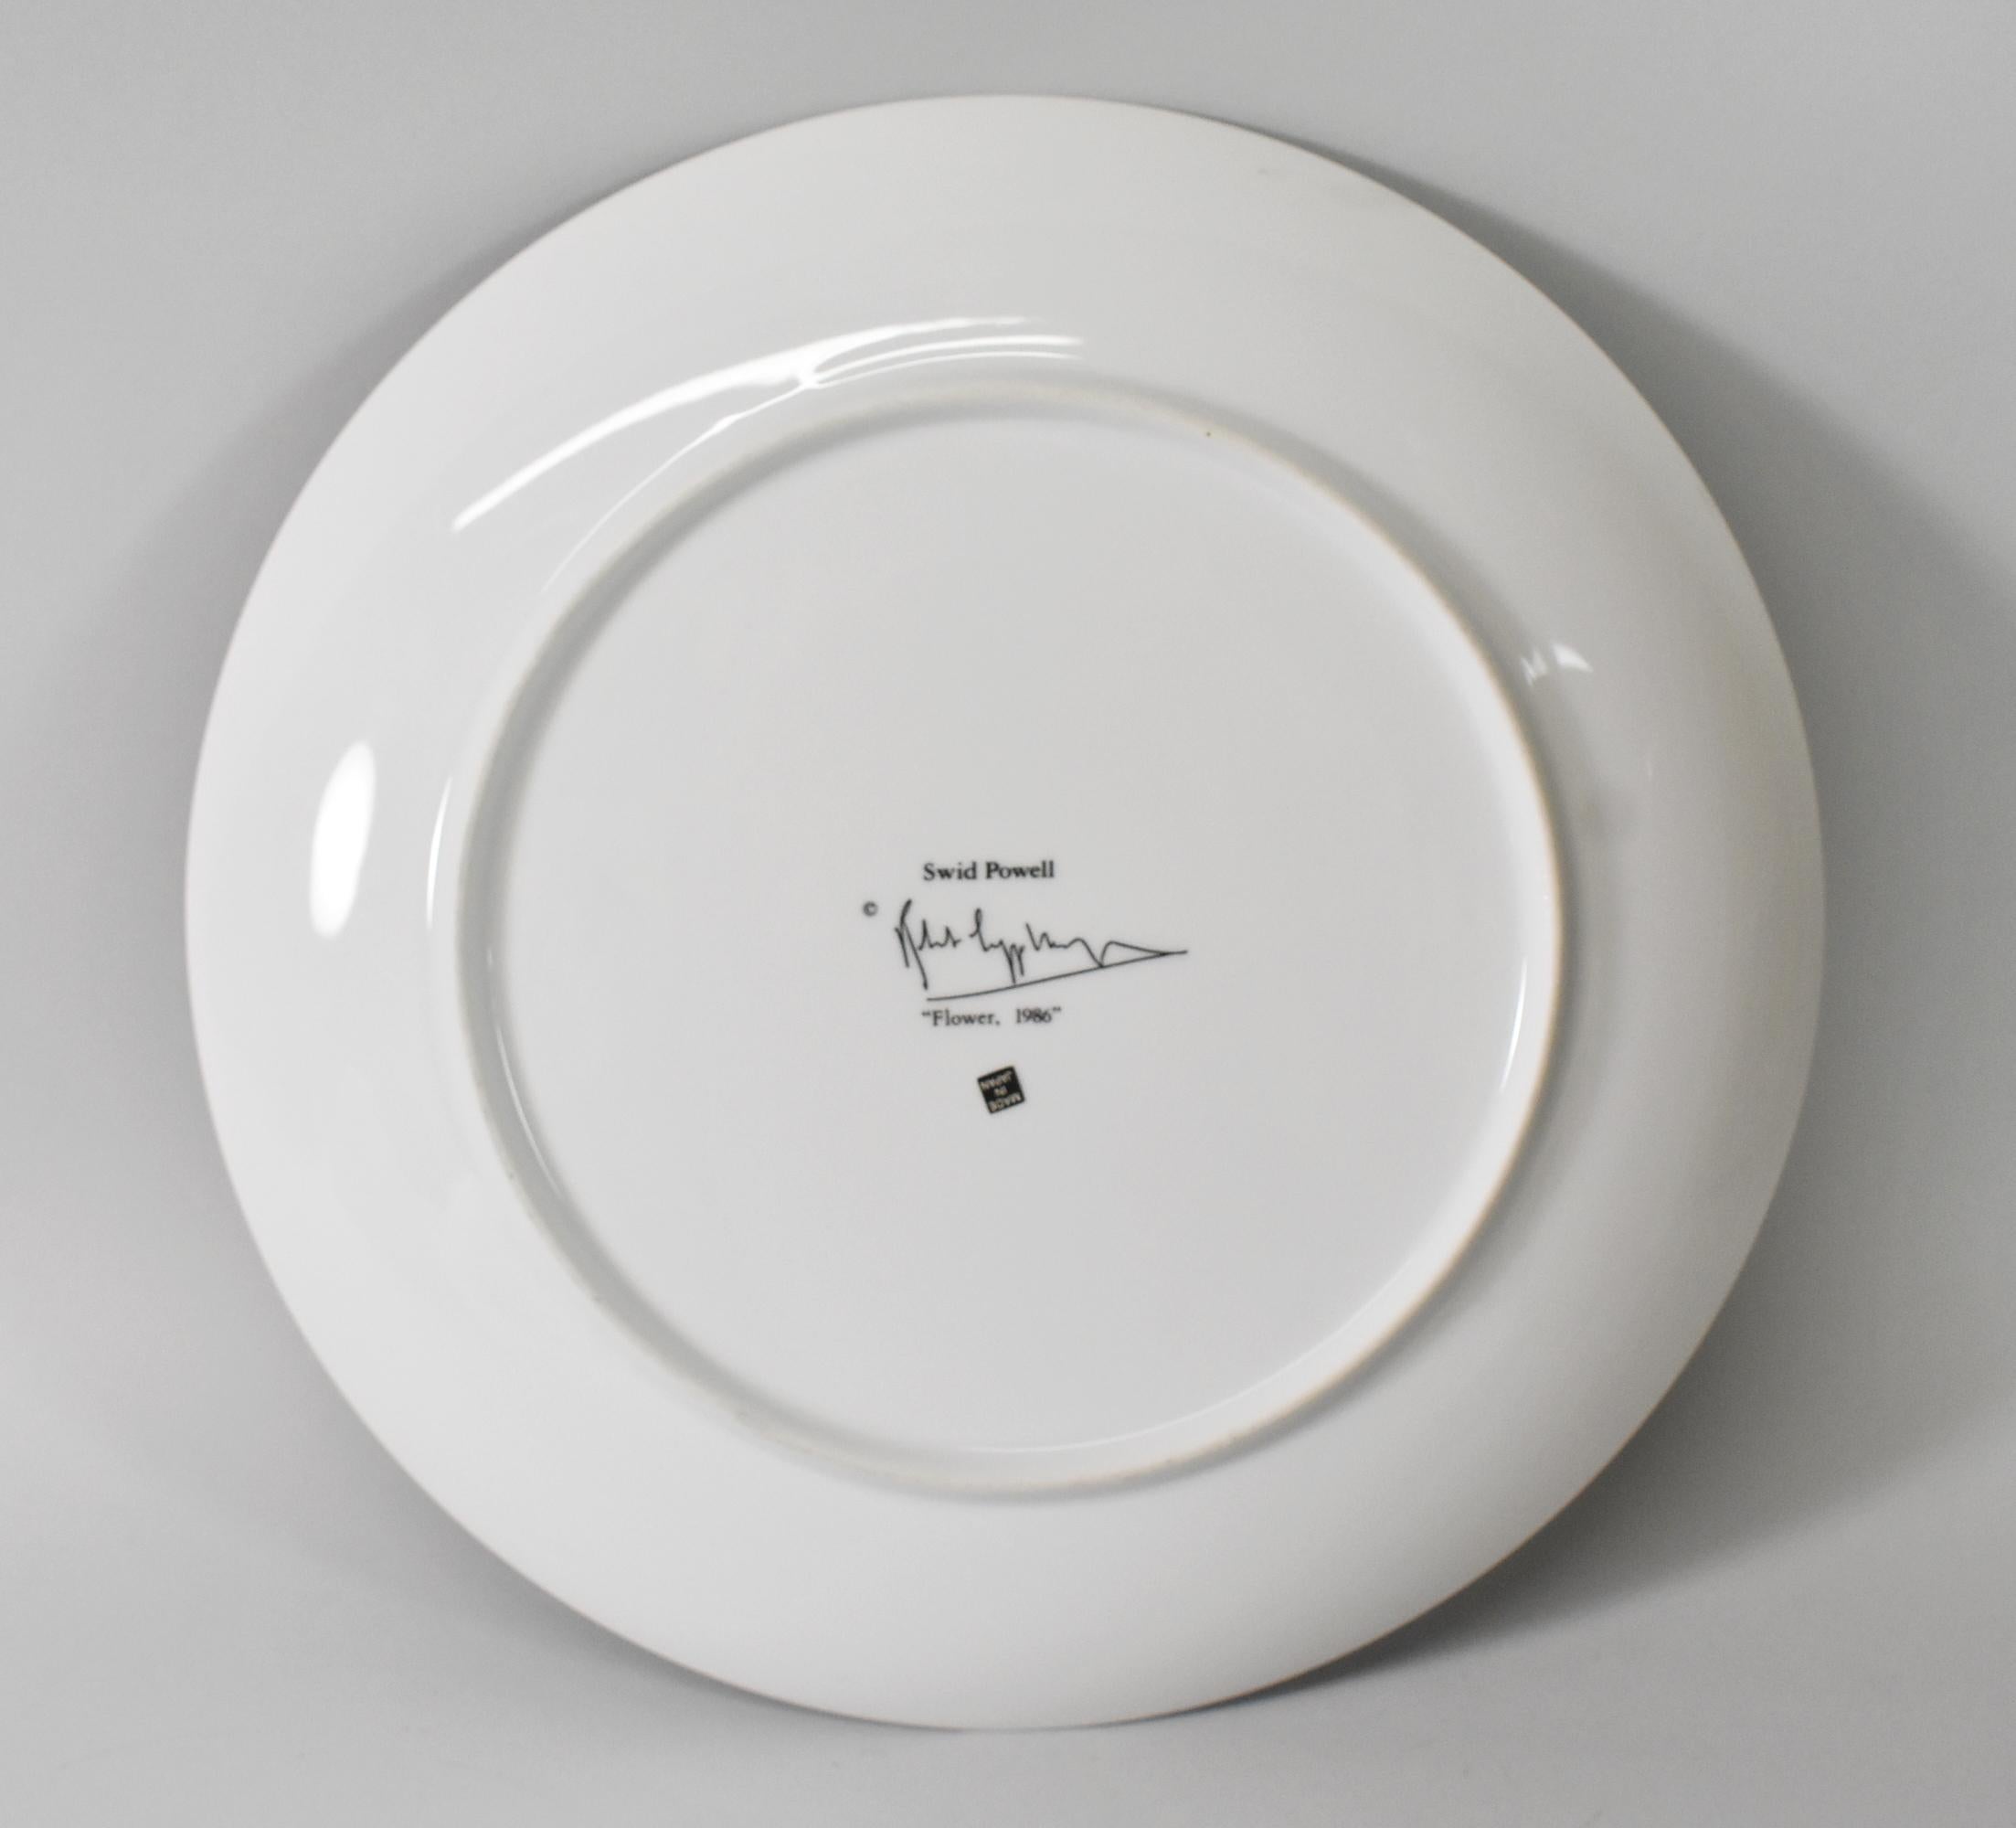 Black and white porcelain collectors plate Swid Powell Robert Mapplethorpe 